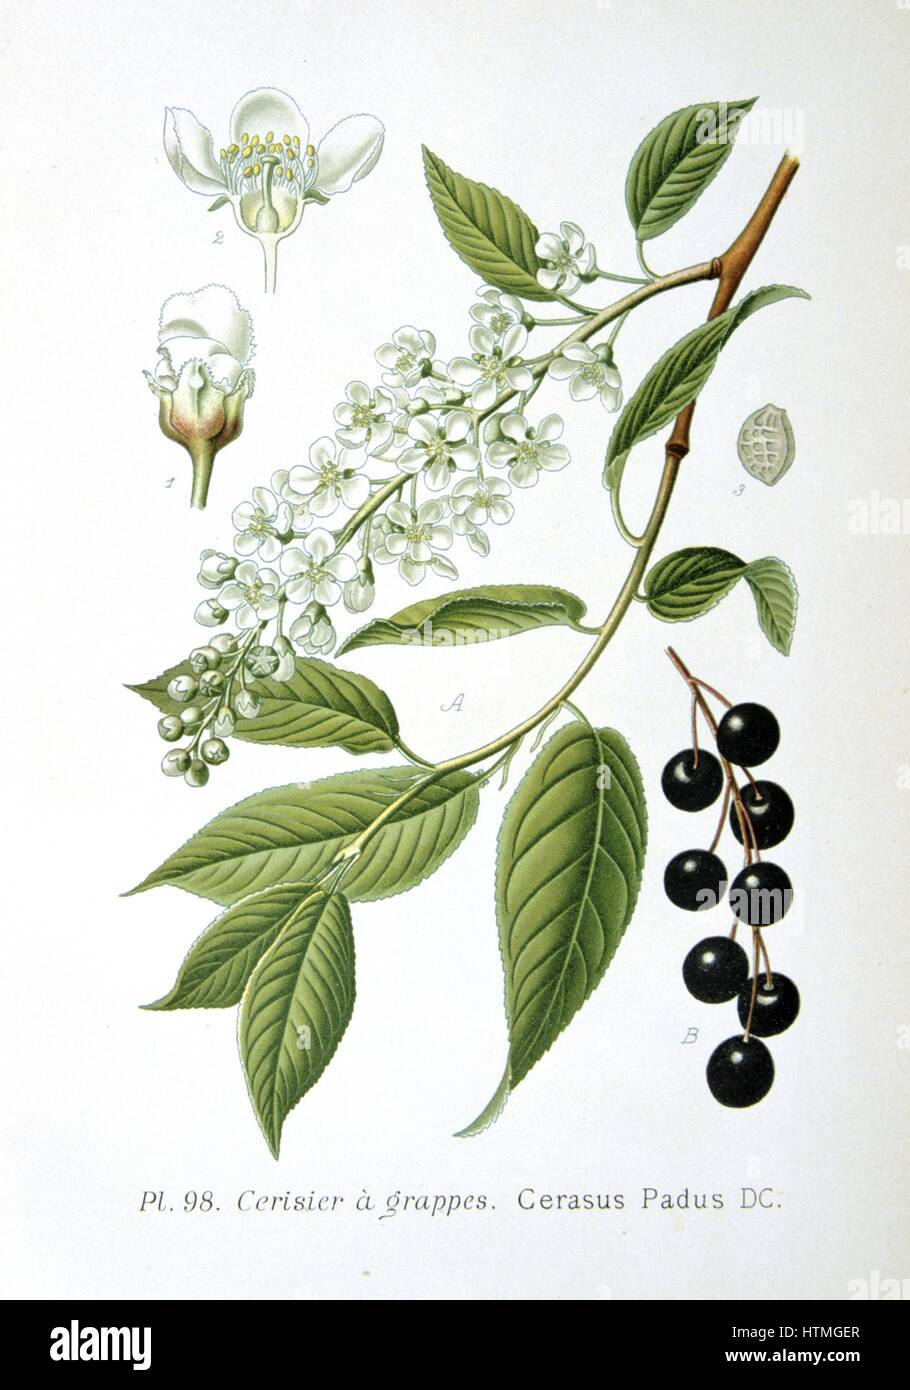 Bird Cherry (Cerasus padus or Prunus padus) deciduous large shrub or small tree, a native of Northern Europe and Northern Asia. From Amedee Masclef 'Atlas des Plantes de France', Paris, 1893. Stock Photo